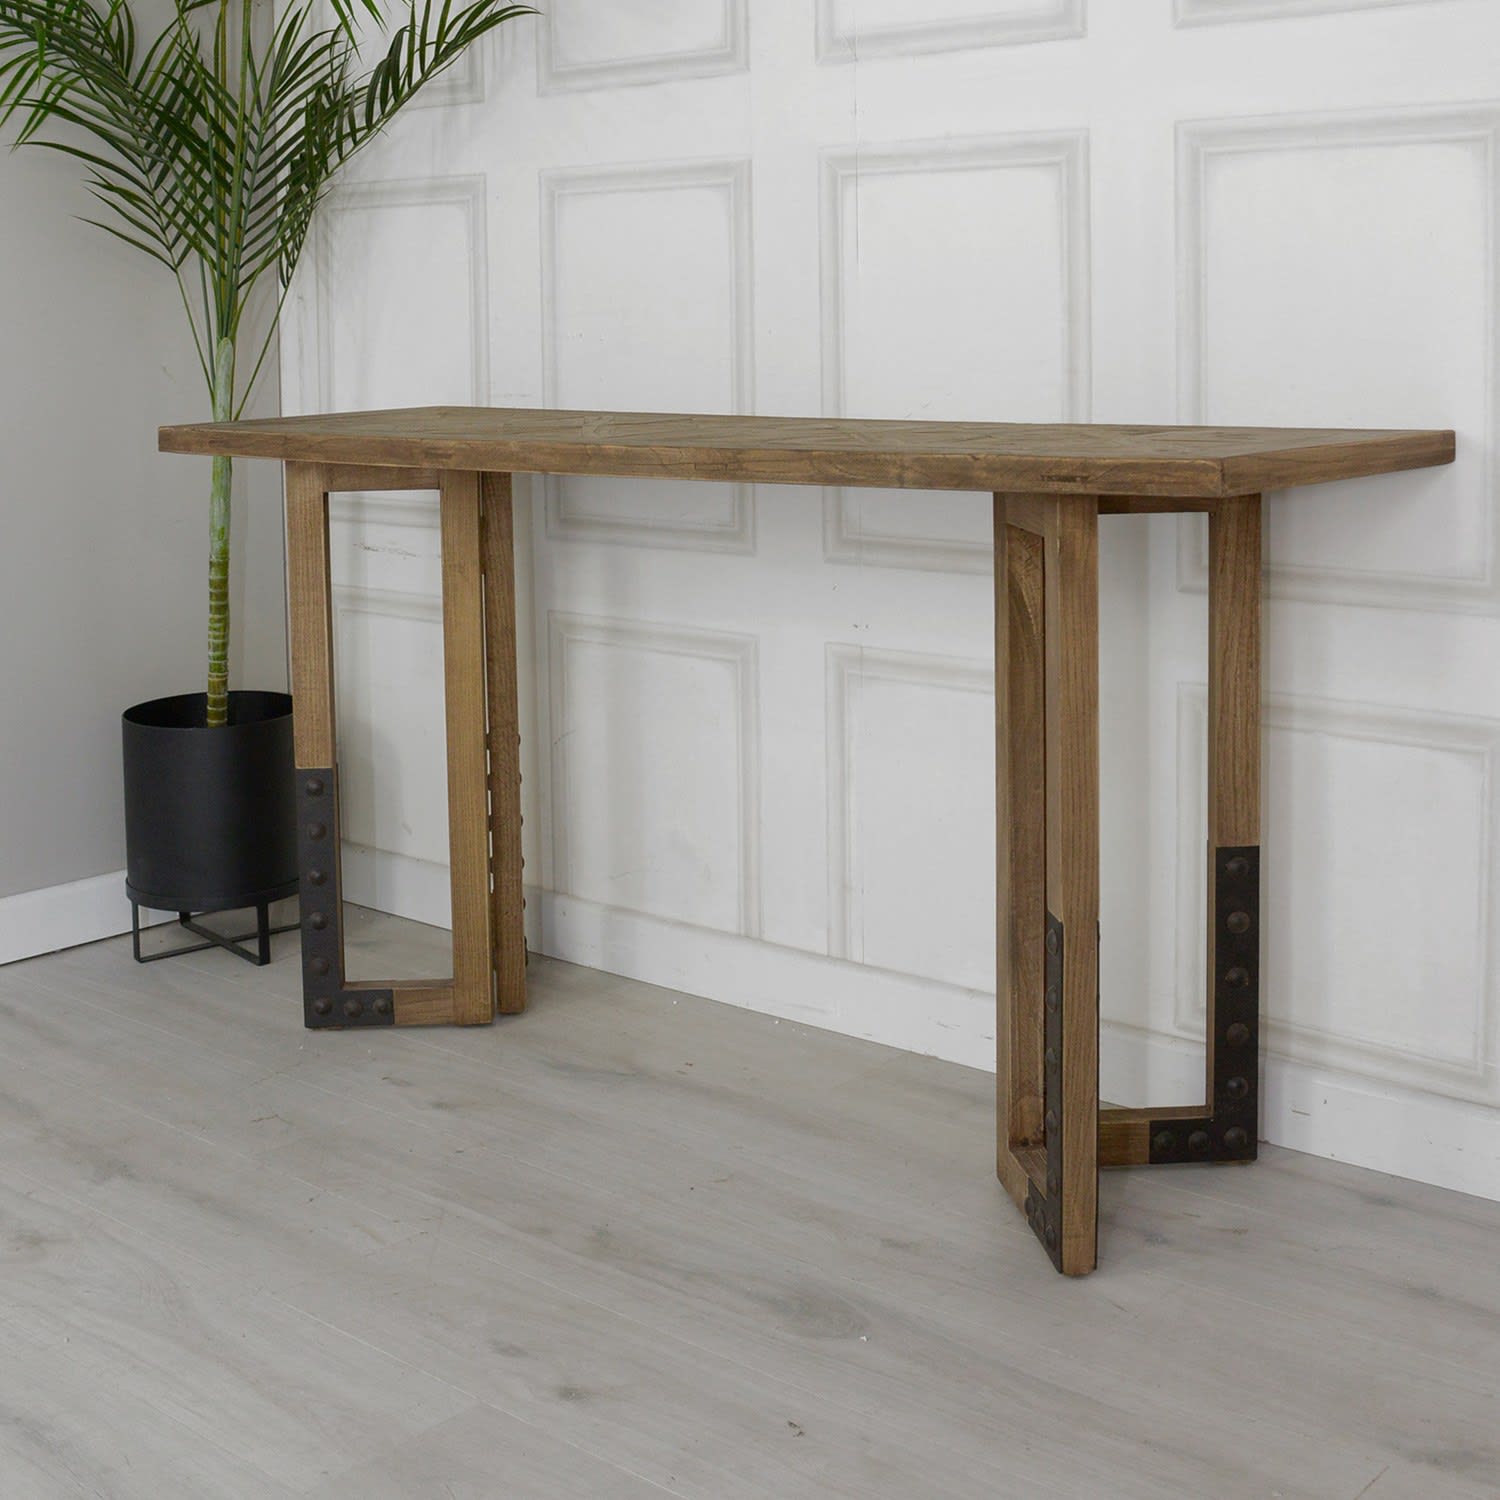 Farmhouse Hall Console Table with Iron Accents